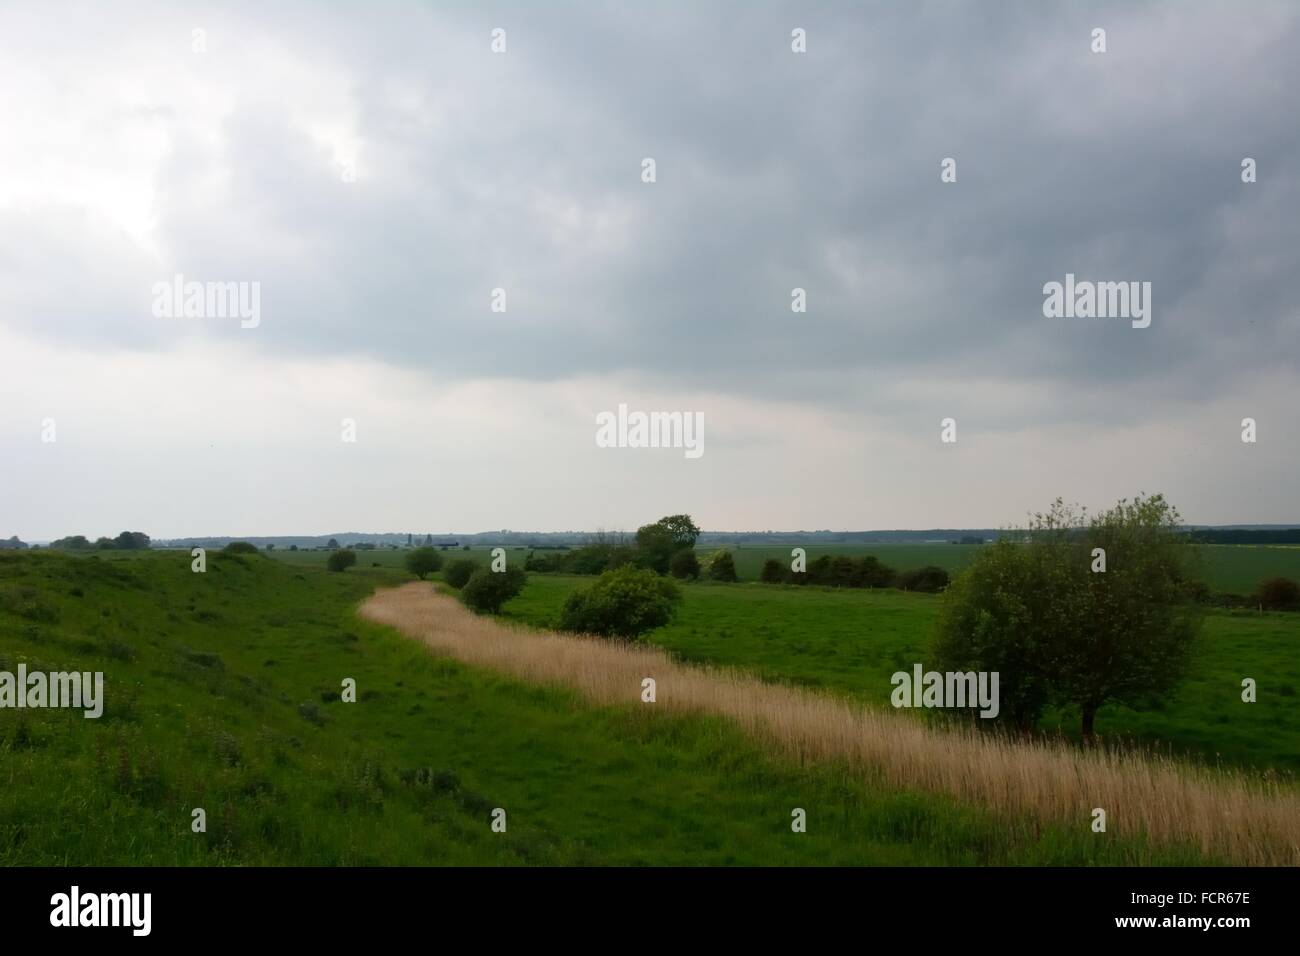 Thurlby fen slipe nature reserve. A view over nature reserves and farmland of the Lincolnshire fens Stock Photo